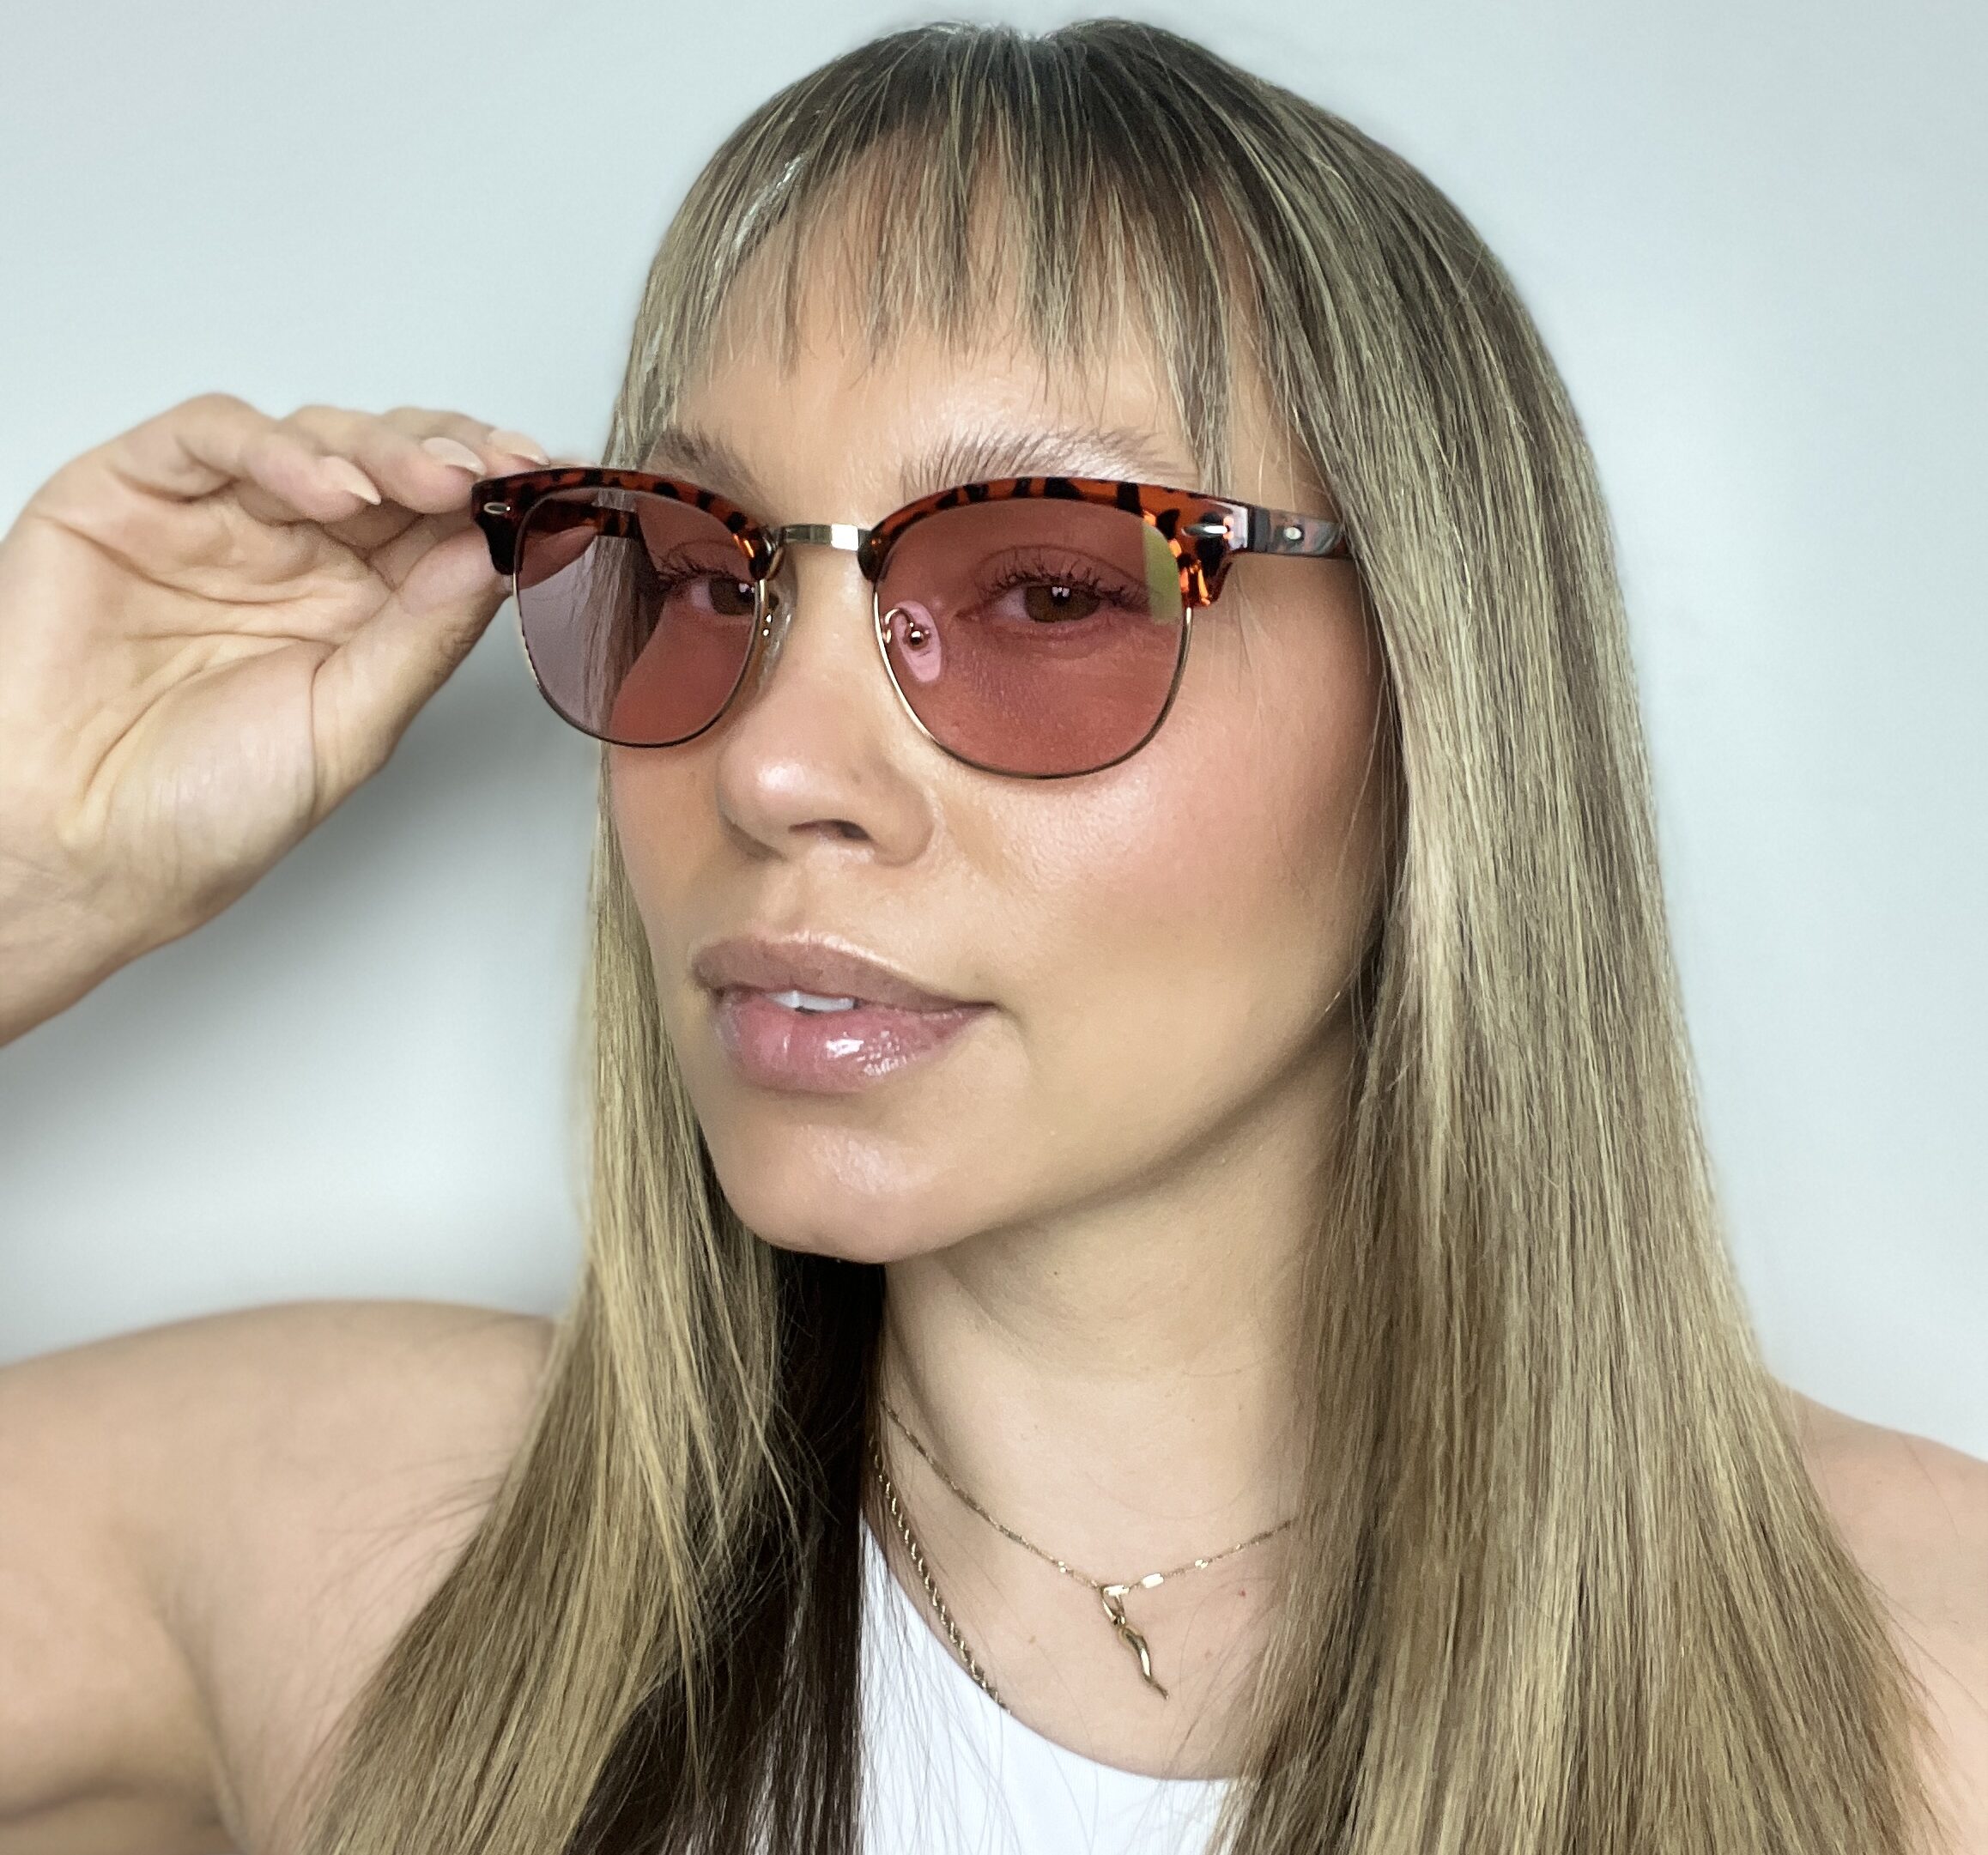 Do Migraine Glasses Actually Work? I Tried Them So You Don’t Have To